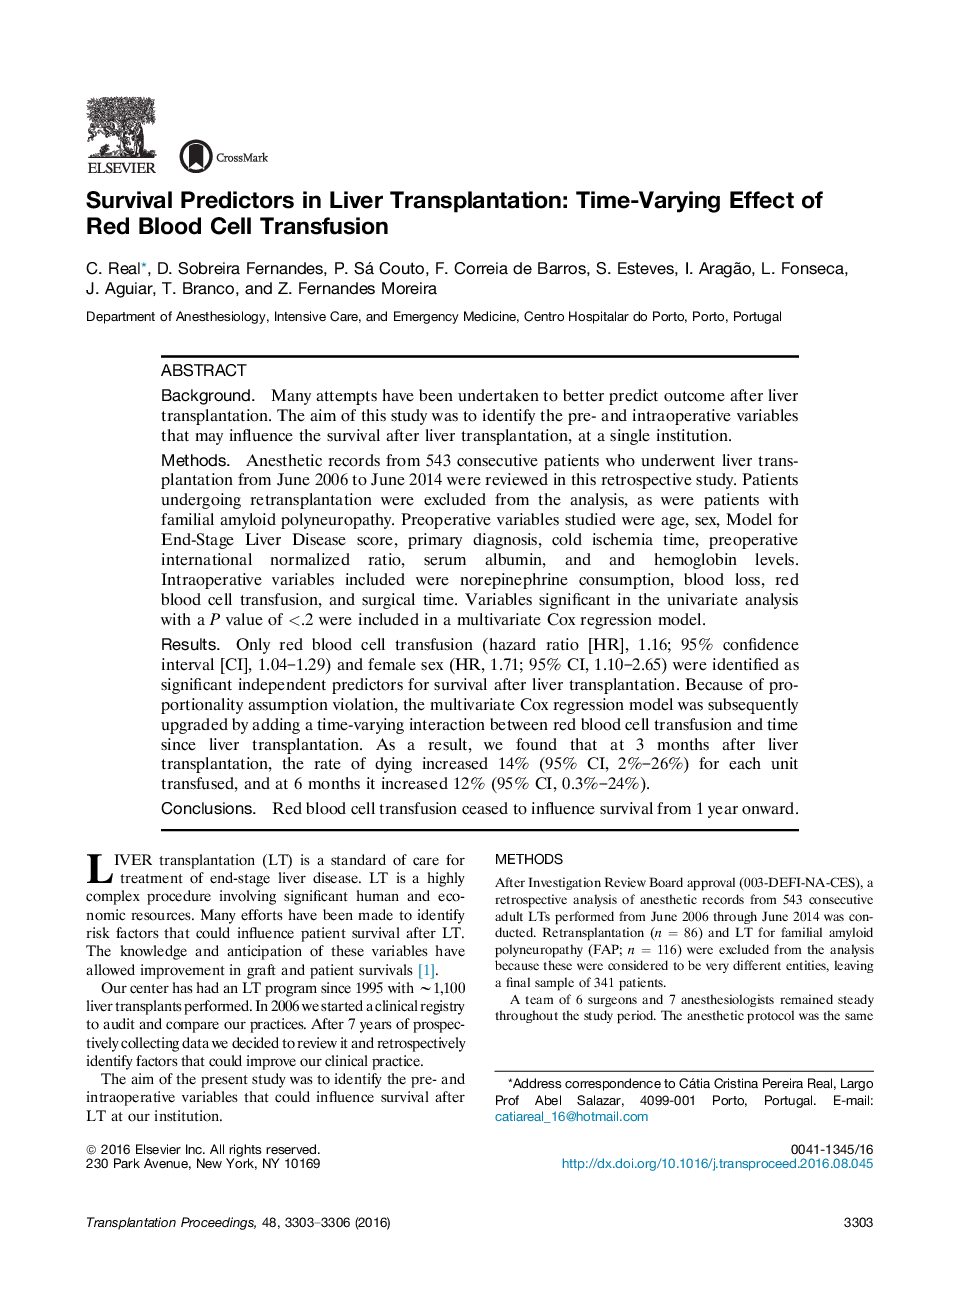 Recent Advances in TransplantationLiver transplantationSurvival Predictors in Liver Transplantation: Time-Varying Effect of Red Blood Cell Transfusion